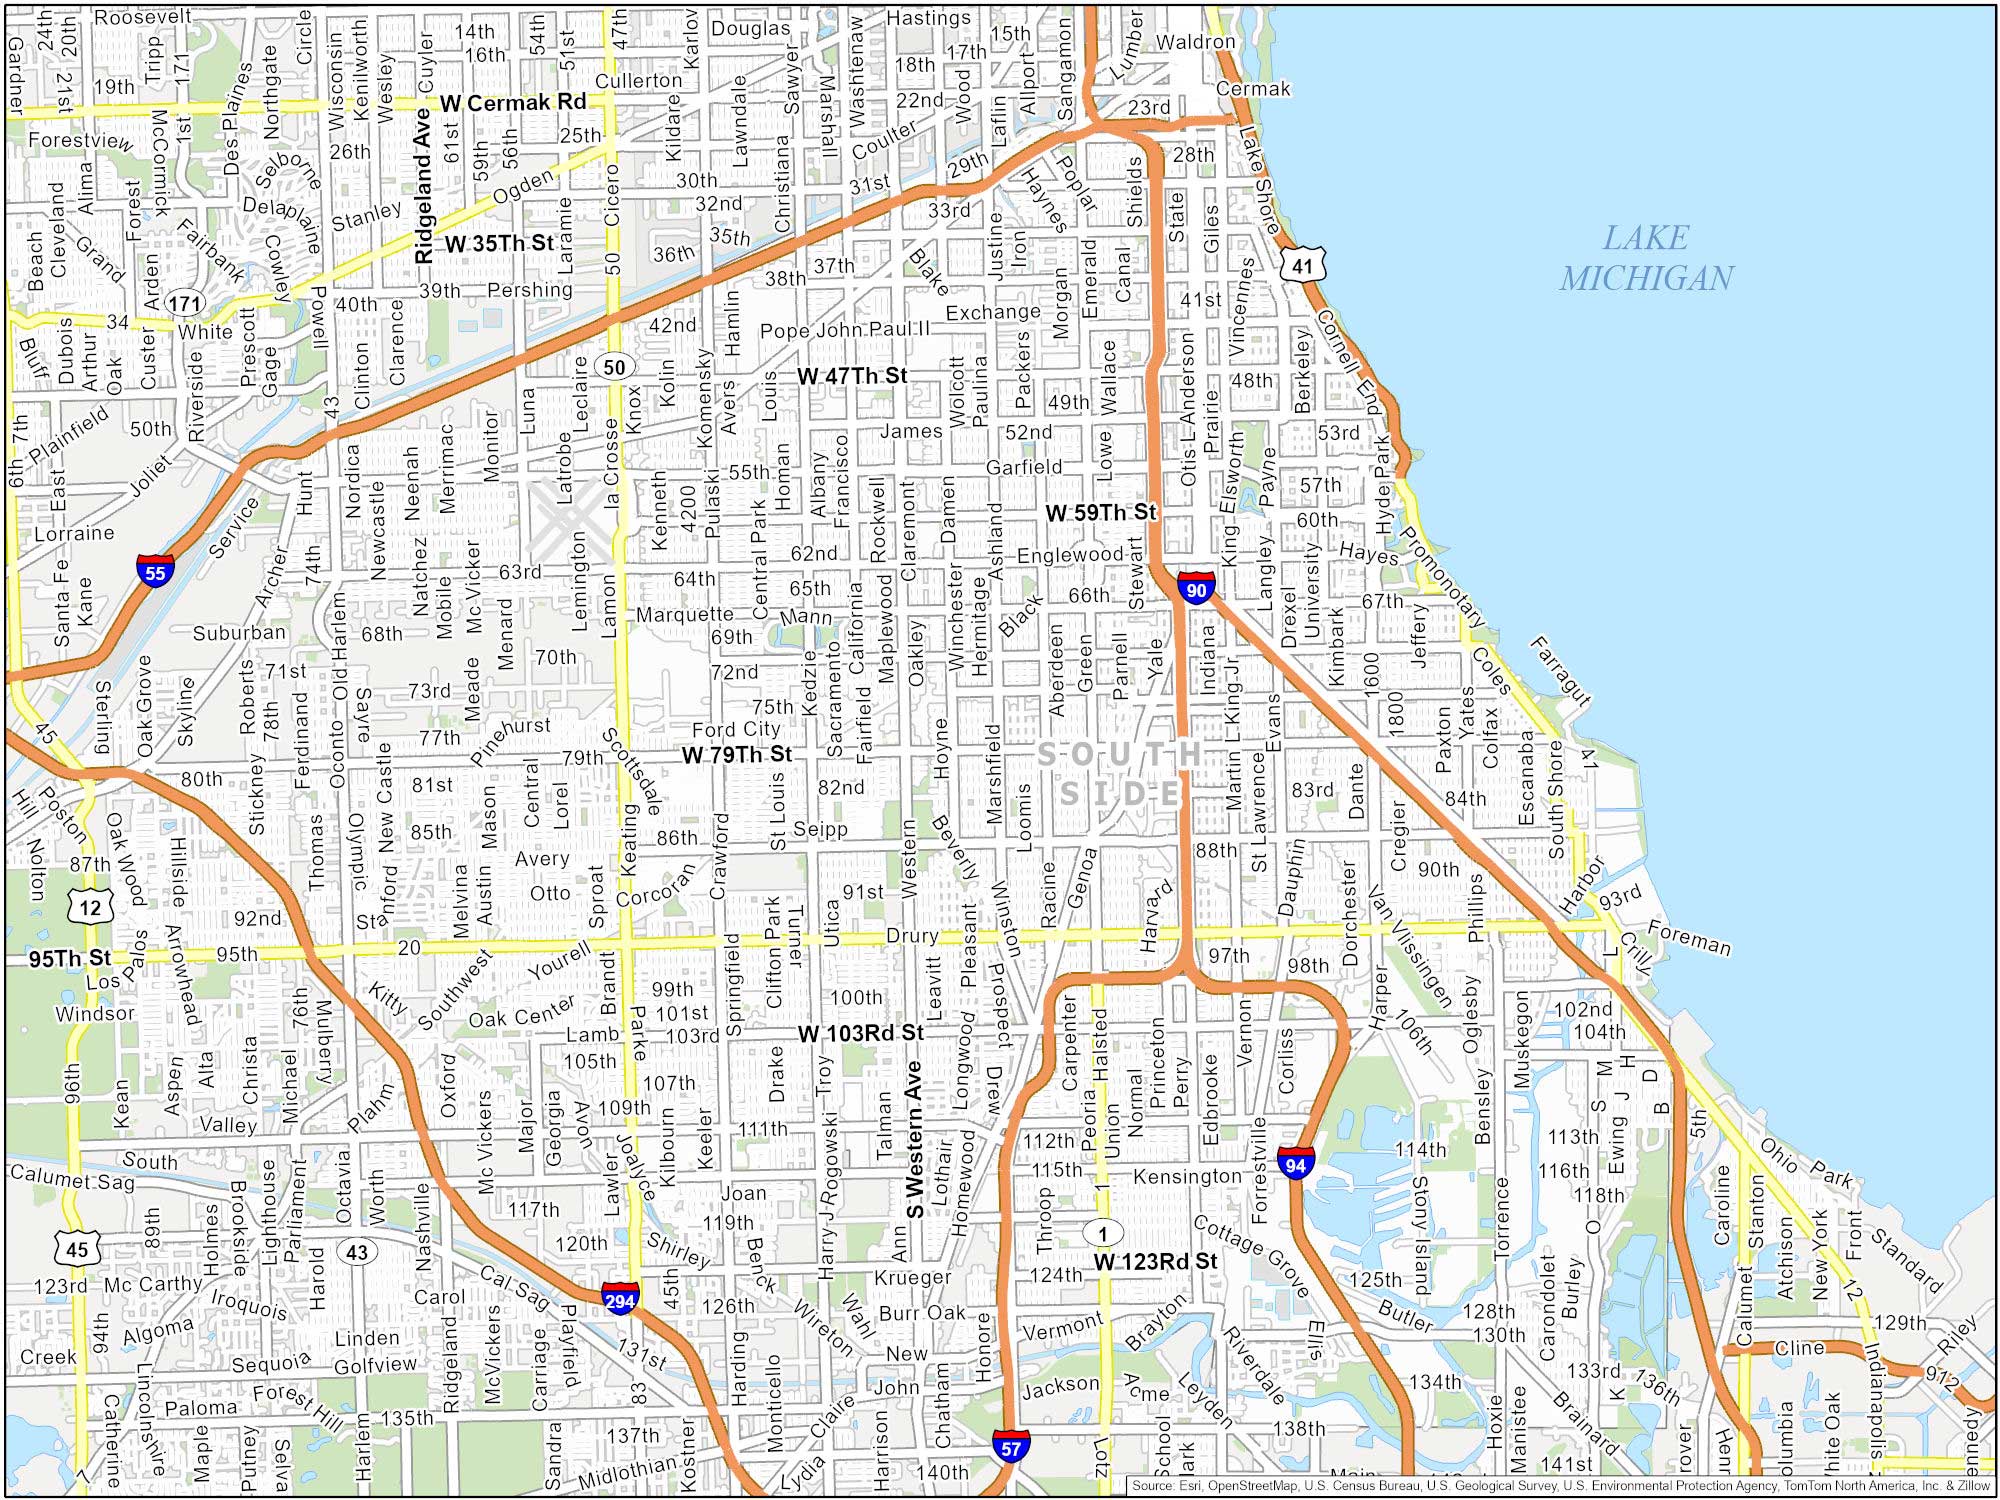 Chicago South Side Map